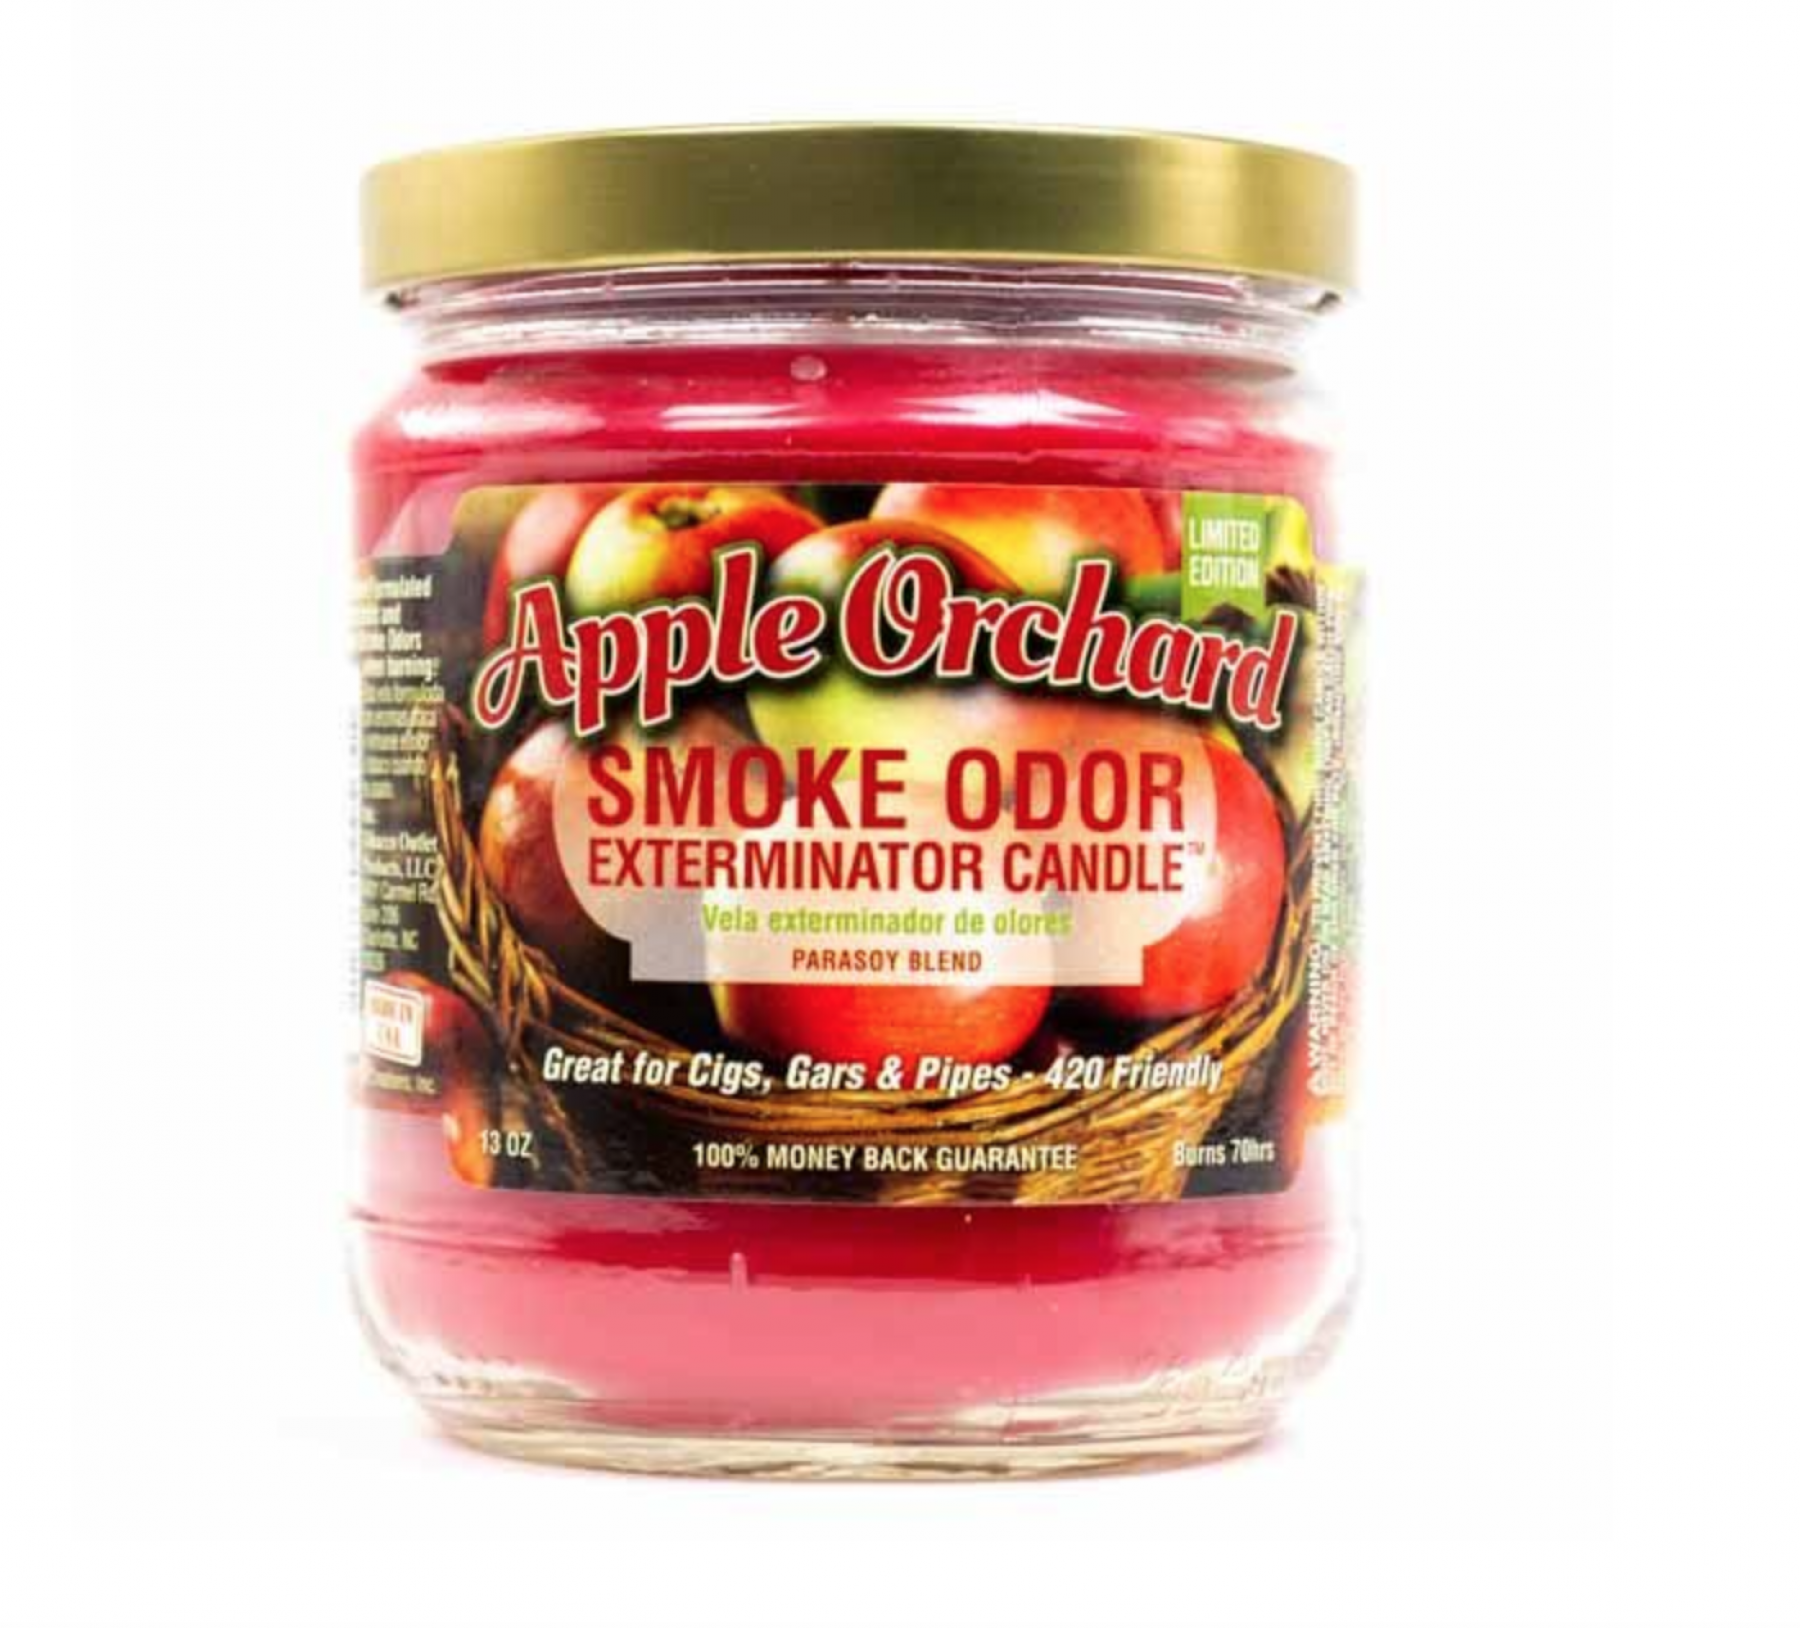 Red wax candle in Jar with Smoke Odor Label